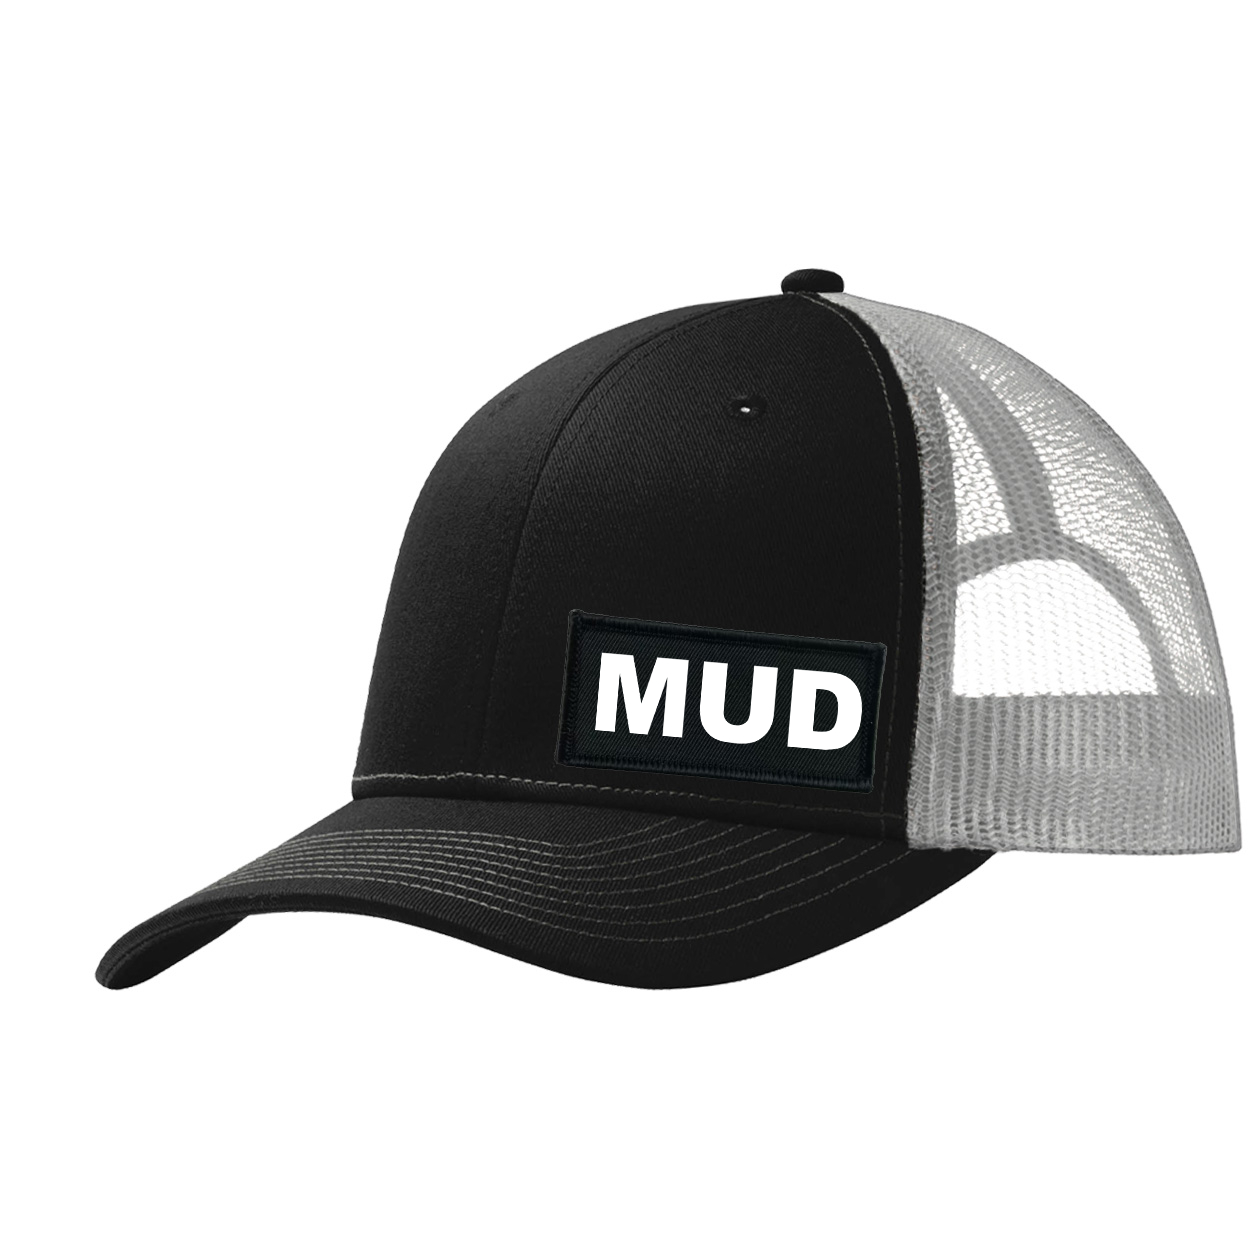 Mud Brand Logo Night Out Woven Patch Snapback Trucker Hat Black/Gray 